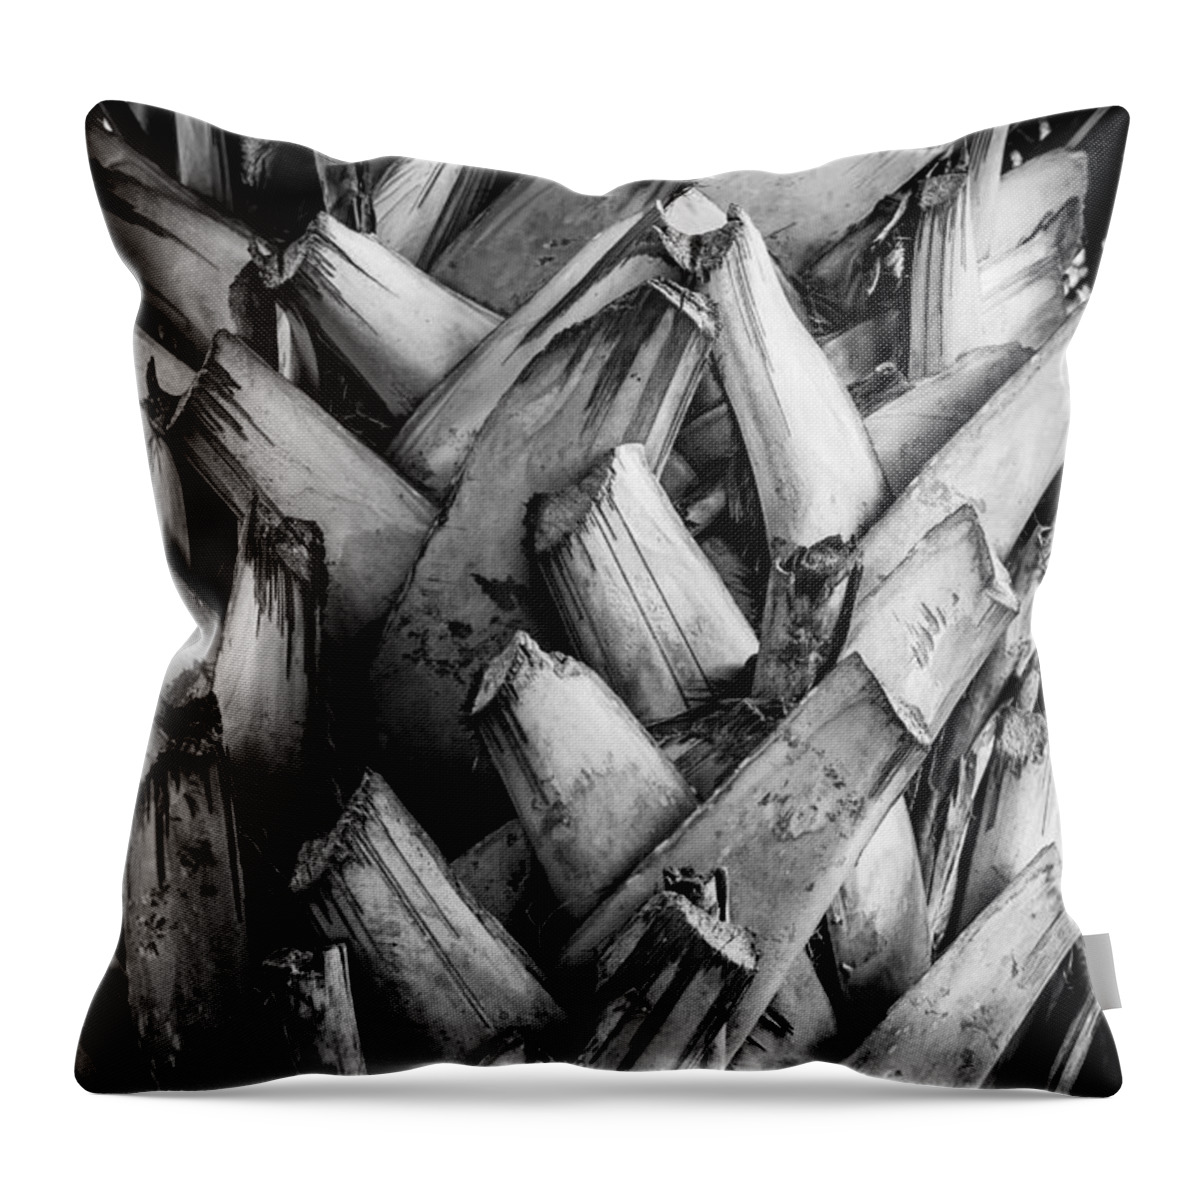 Sabal Mexicana Throw Pillow featuring the photograph Over and Under by Melinda Ledsome